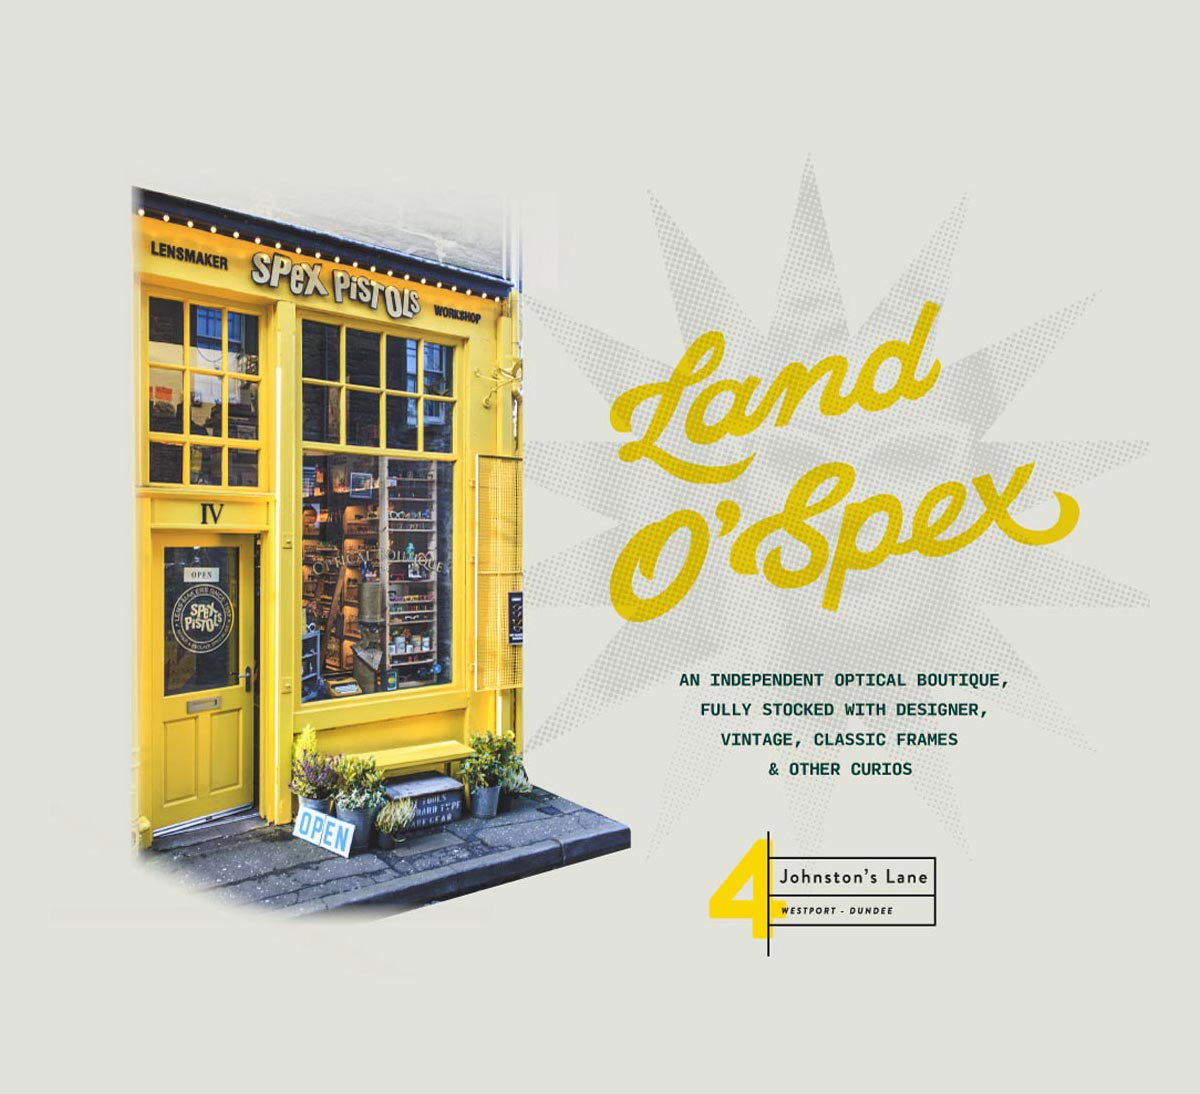 Small yellow shopfront with 'Spex Pistols' on the sign, sits on the left hand side of a starburst with the words land-o-spex.